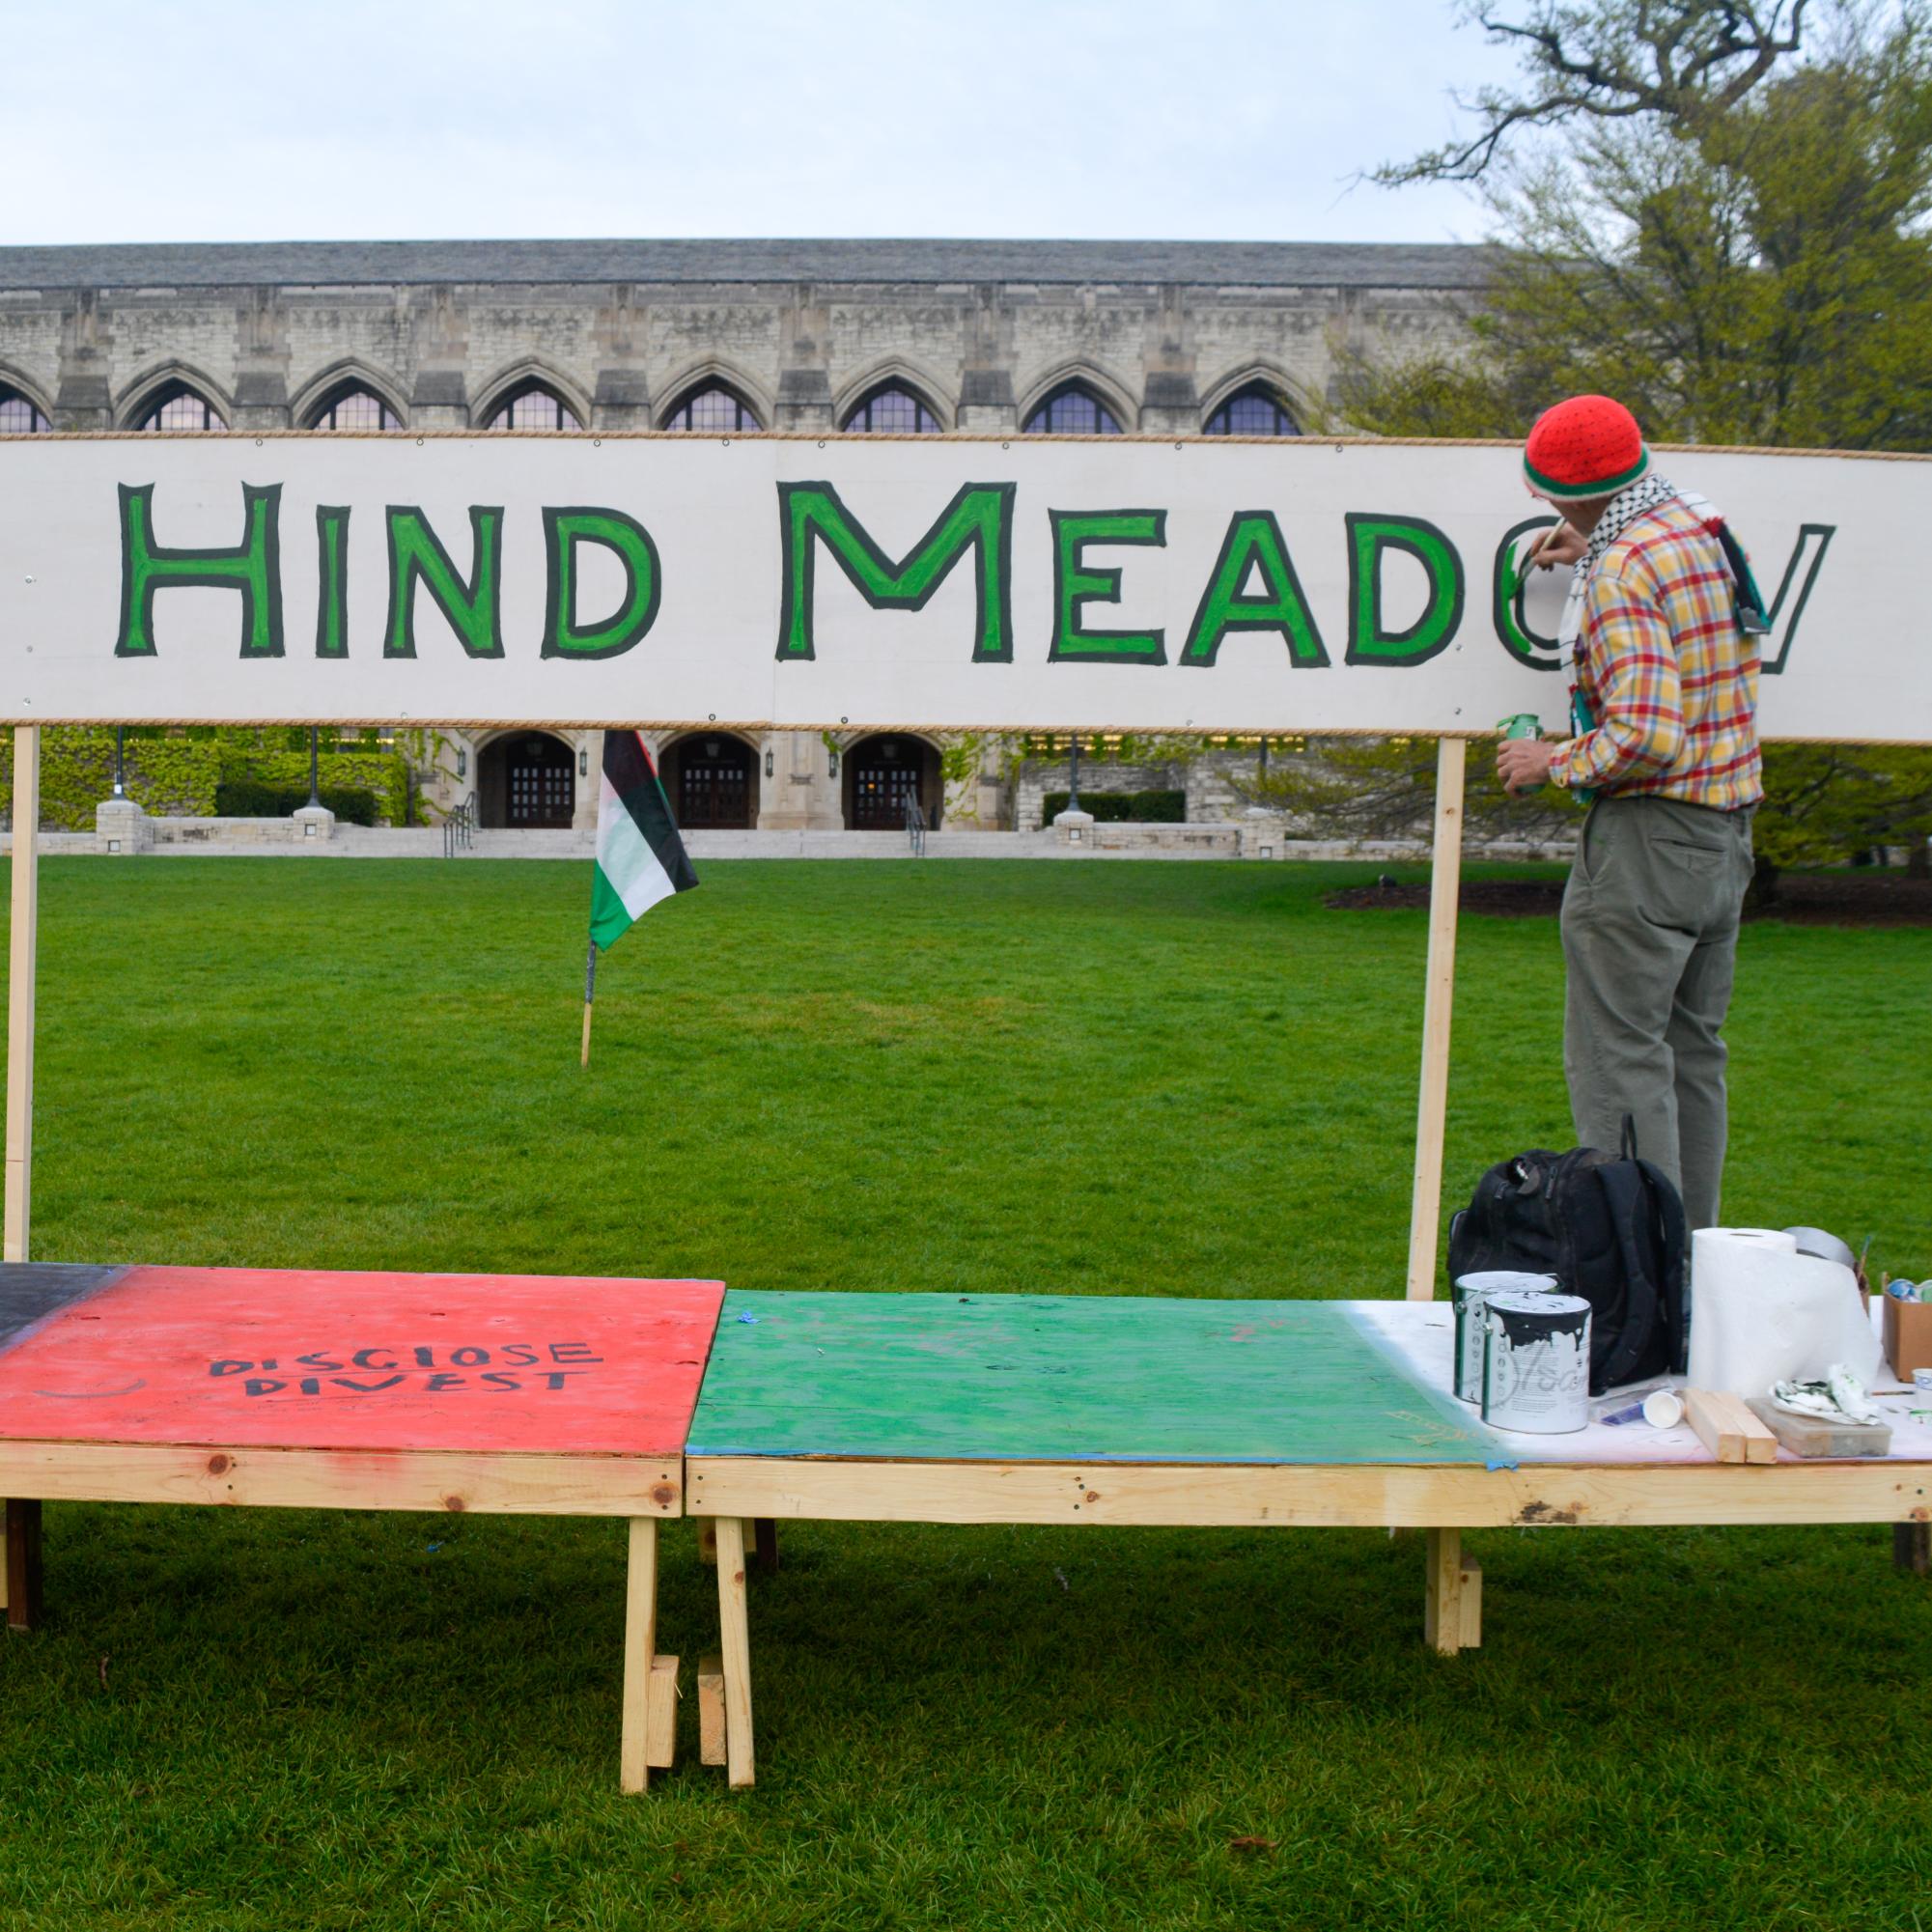 Evanston resident Dave Trippel began painting a sign Thursday afternoon that renames Deering Meadow Hind Meadow after Hind Rajab, a 6-year-old Palestinian child who was killed in January by Israeli tank fire in Gaza.